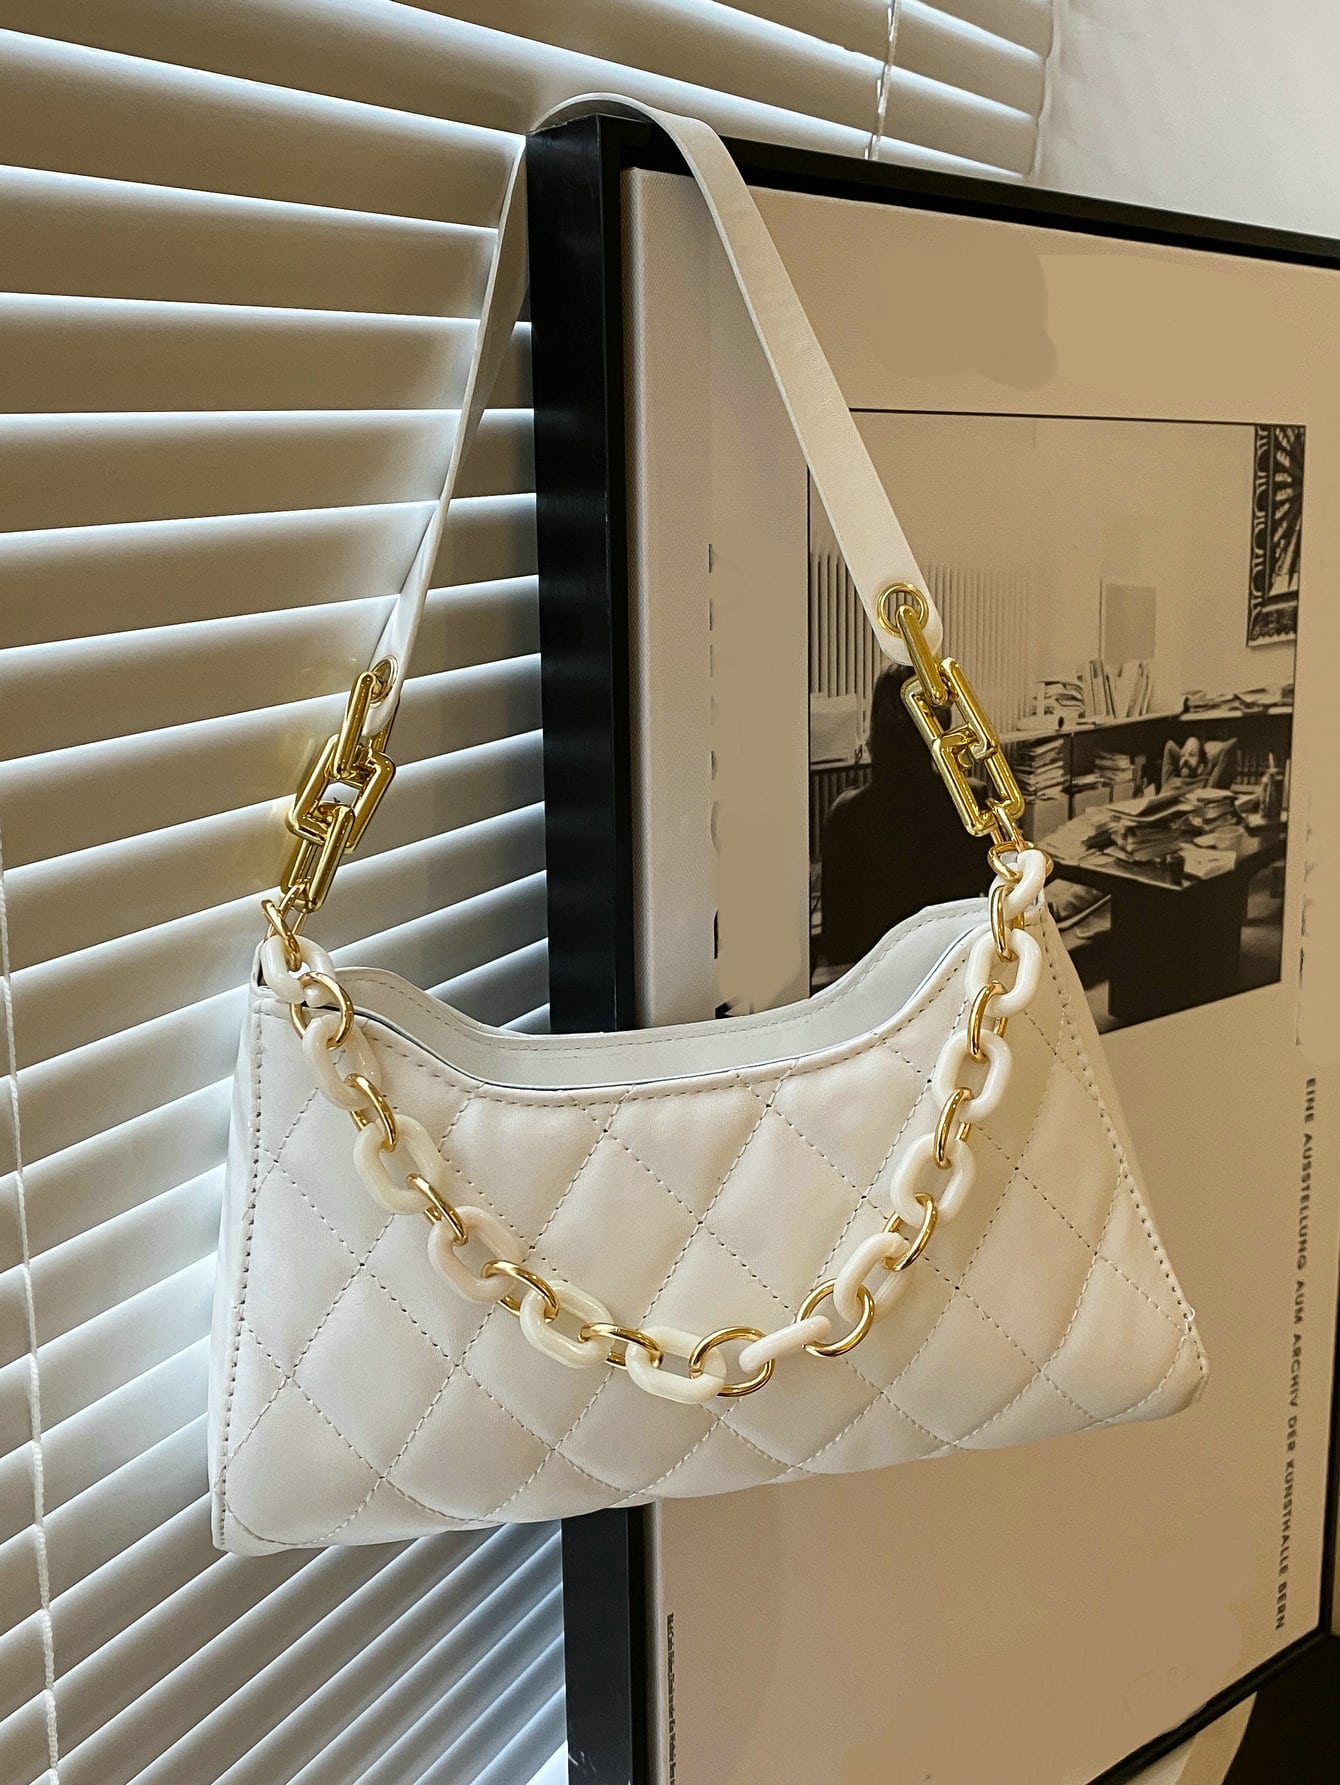 Quilted Chain Decor Baguette Bag - White - FD ⚡